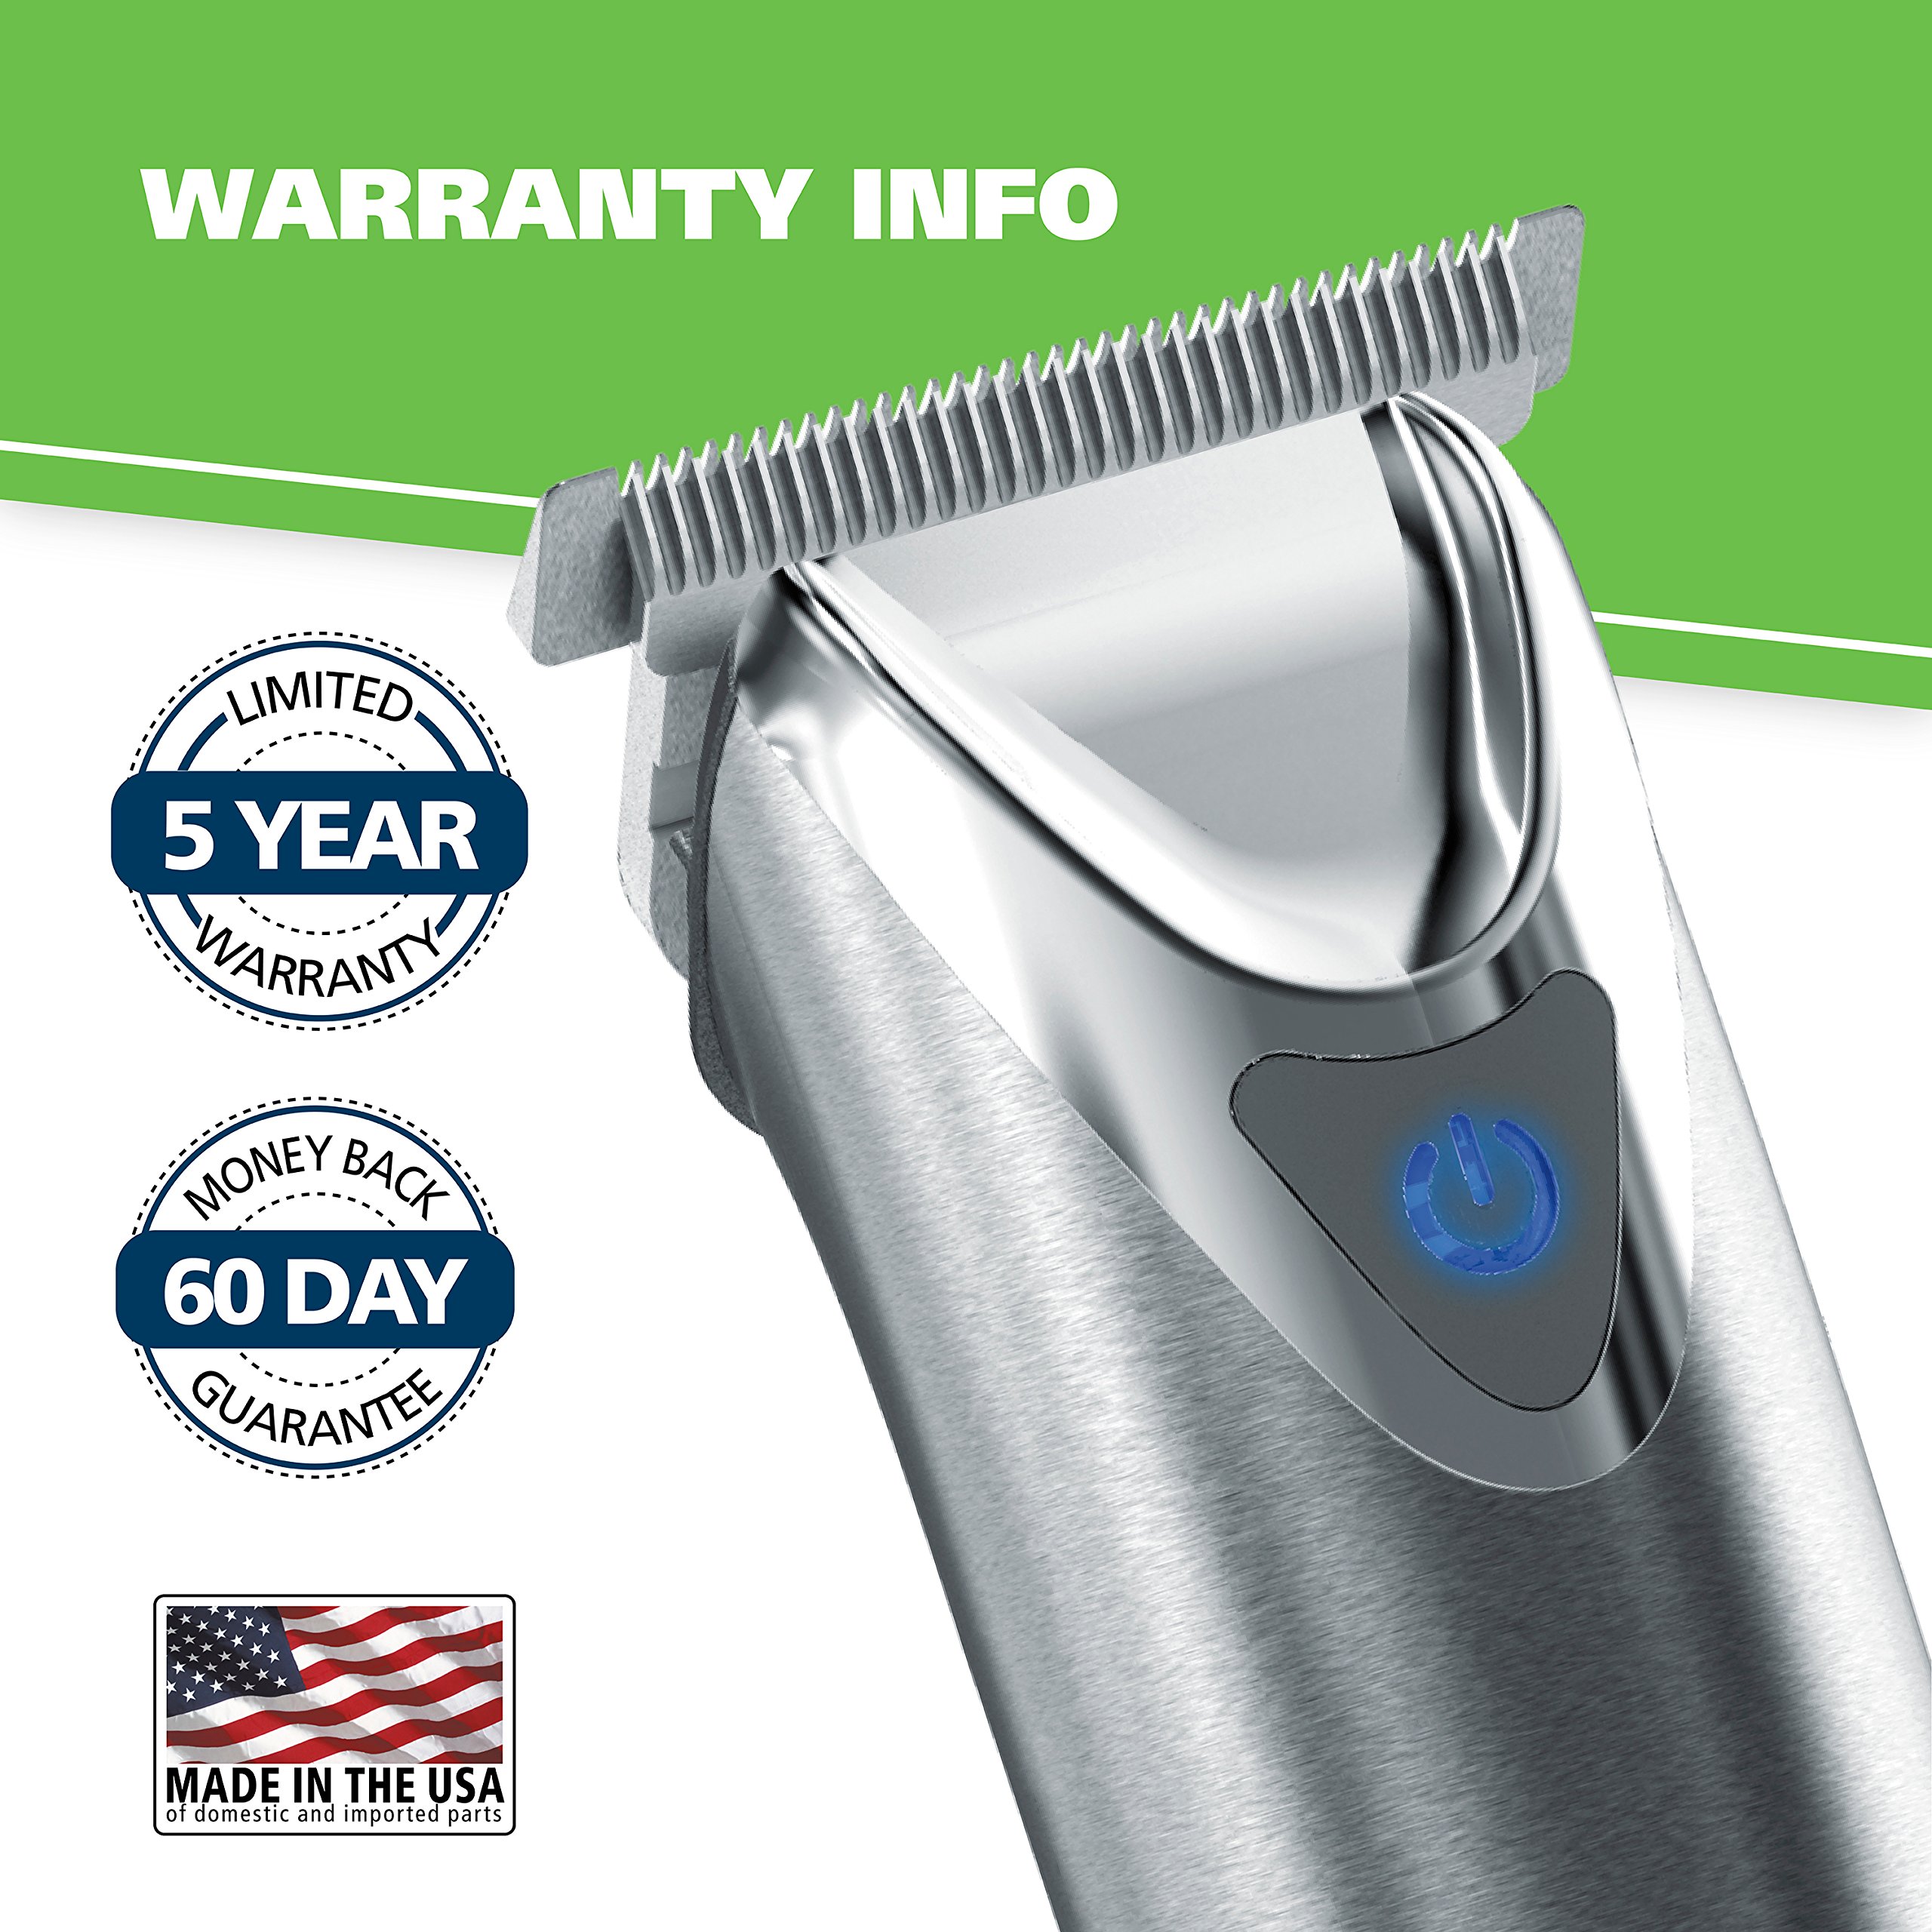 Wahl USA Stainless Steel Lithium Ion 2.0+ Beard Trimmer for Men - Electric Shaver & Nose Ear Trimmer - Rechargeable All in One Men's Grooming Kit - Model 9864SS